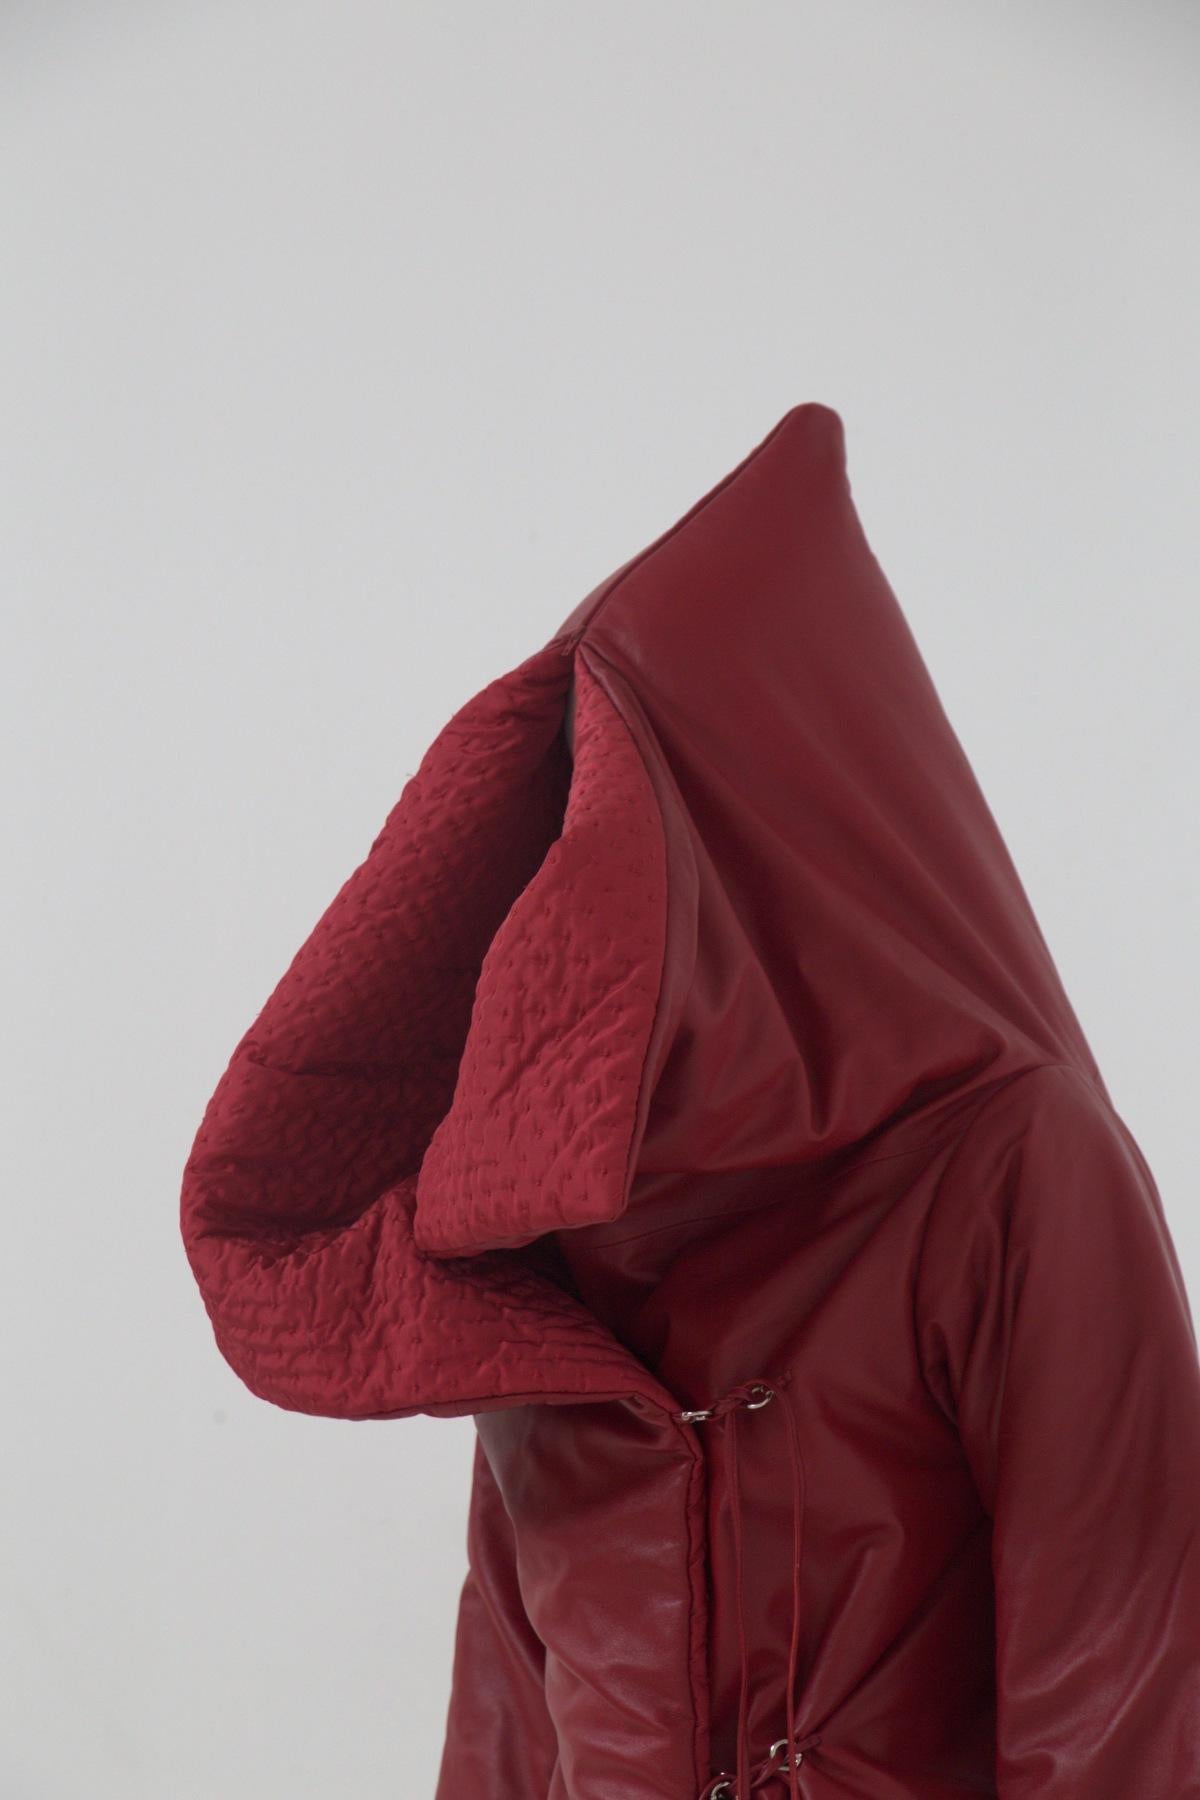 Flashy jacket in fine leather designed by Gianfranco Ferrè for Dior in the 90s, made in Italy.
ORIGINAL LABEL.
The jacket is entirely made of fine red leather externally, with a hood, the strong point of the jacket.
In fact, the hood can be opened